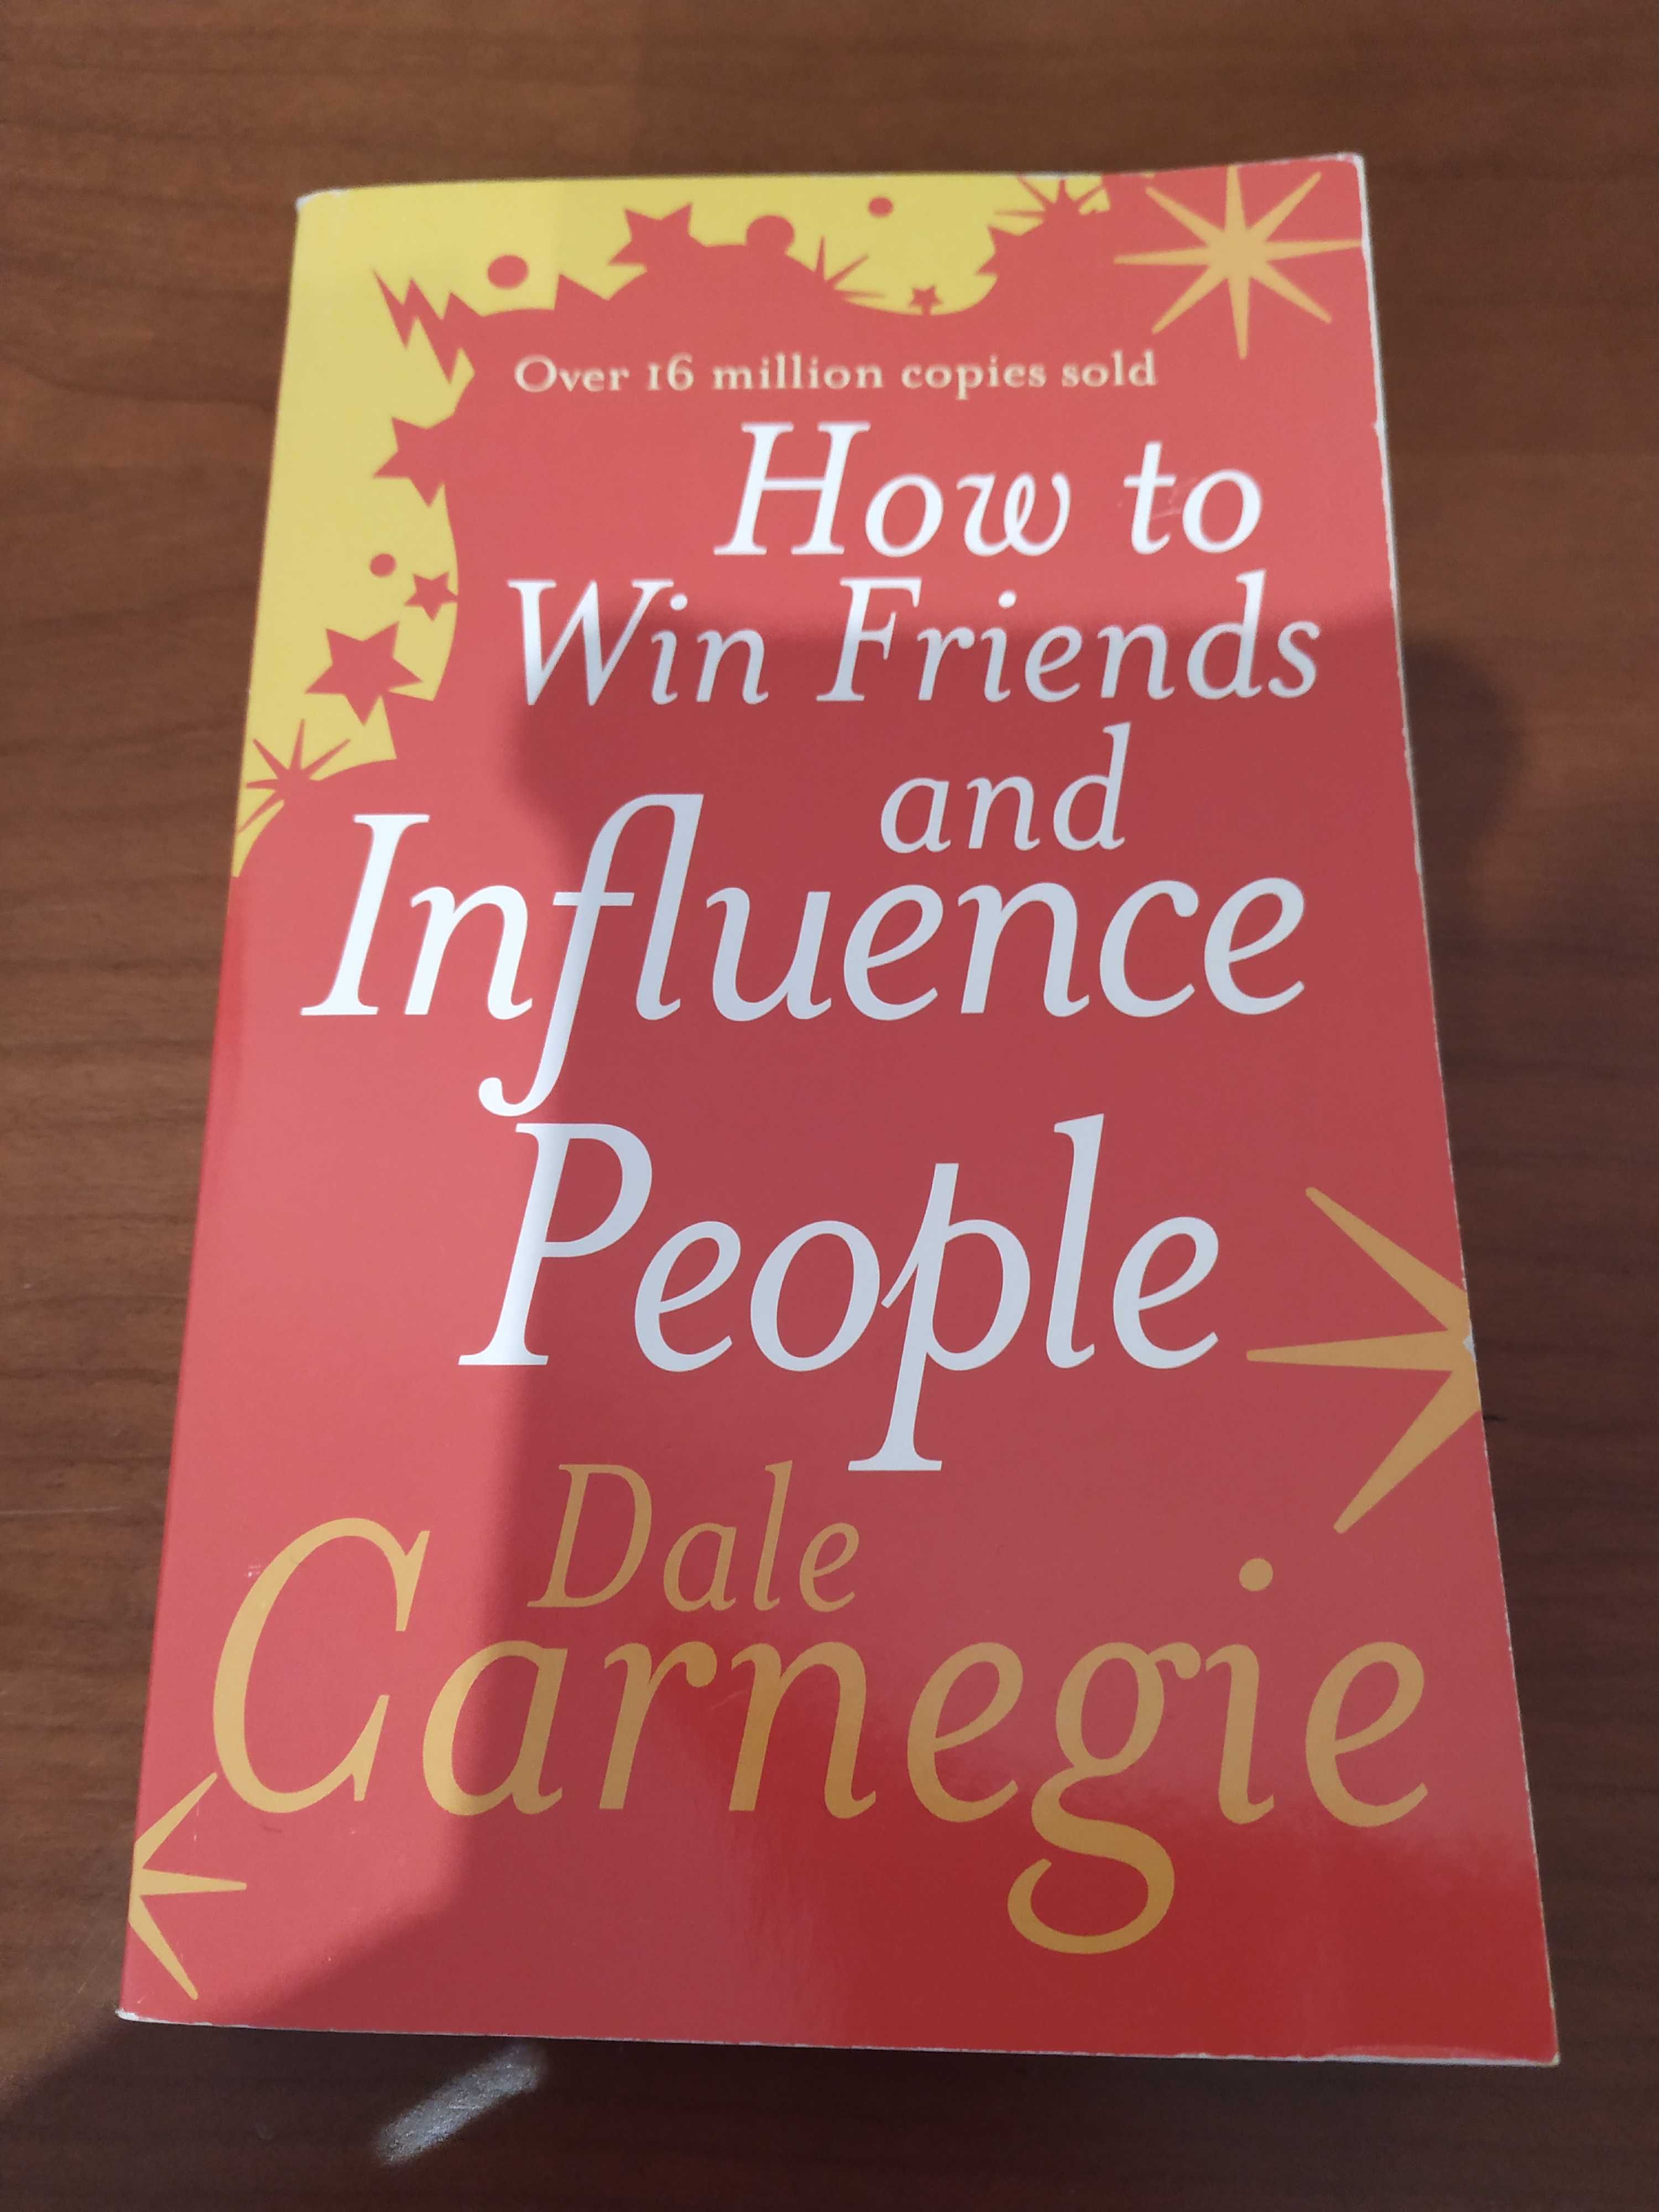 Livro "How to Win Friends and Influence People"